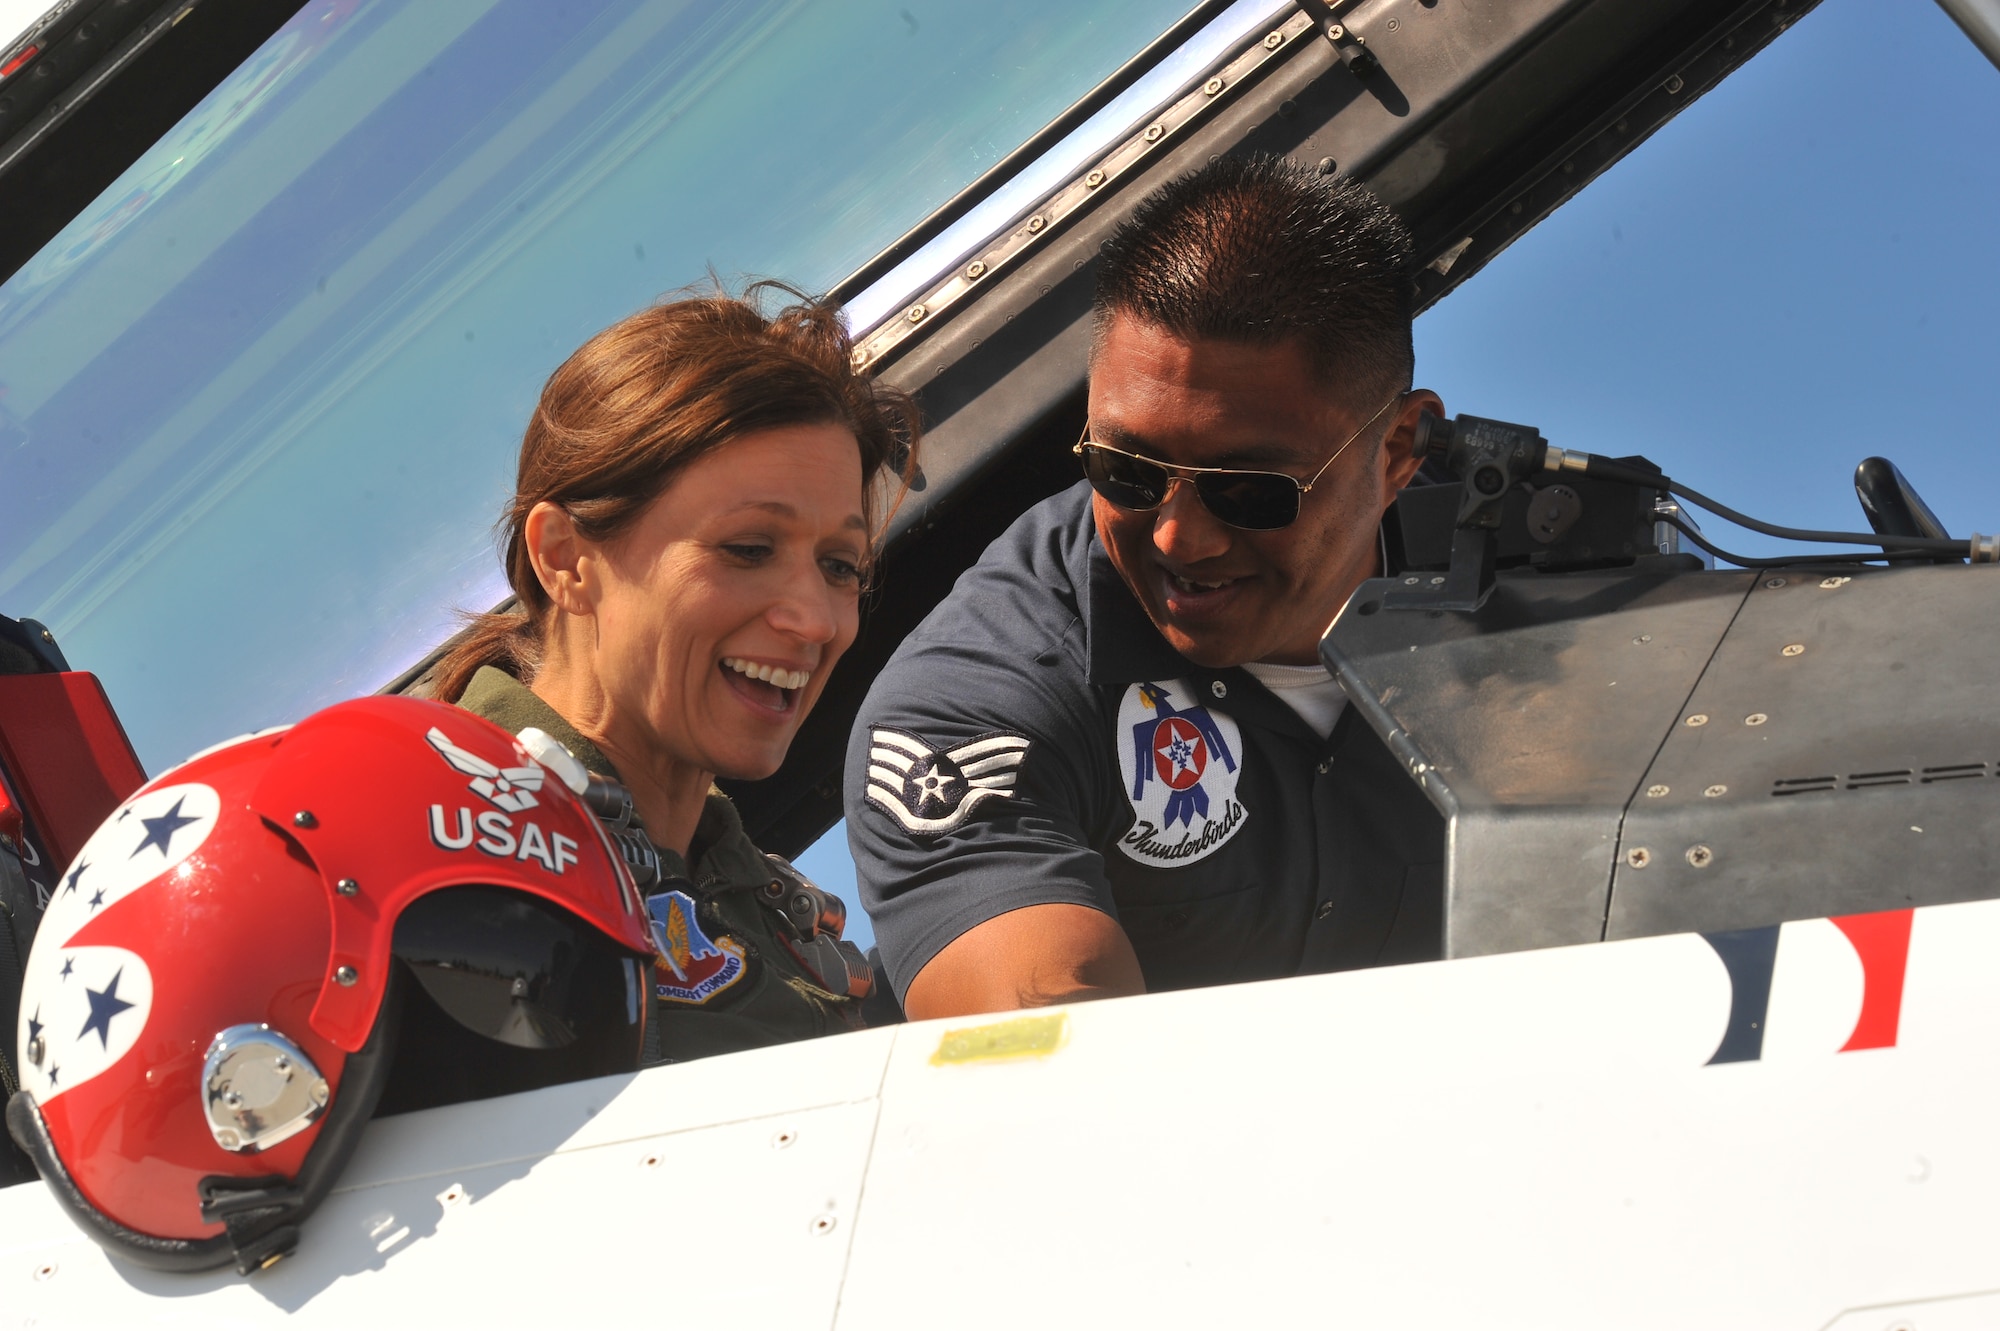 Staff. Sgt. Mark Mira, U.S. Air Force Thunderbirds crew chief, assists Robyn Nance, KXLY news anchor, for her flight in the F-16 Fighting Falcon before SkyFest 2014 at Fairchild Air Force Base, Wash., May 30, 2014.  The Thunderbirds is an Air Combat Command unit composed of eight pilots, including six demonstration pilots, four support officers, three civilians and more than 130 enlisted personnel performing in 25 career fields. (U.S. Air Force photo by Staff Sgt. Veronica Montes)